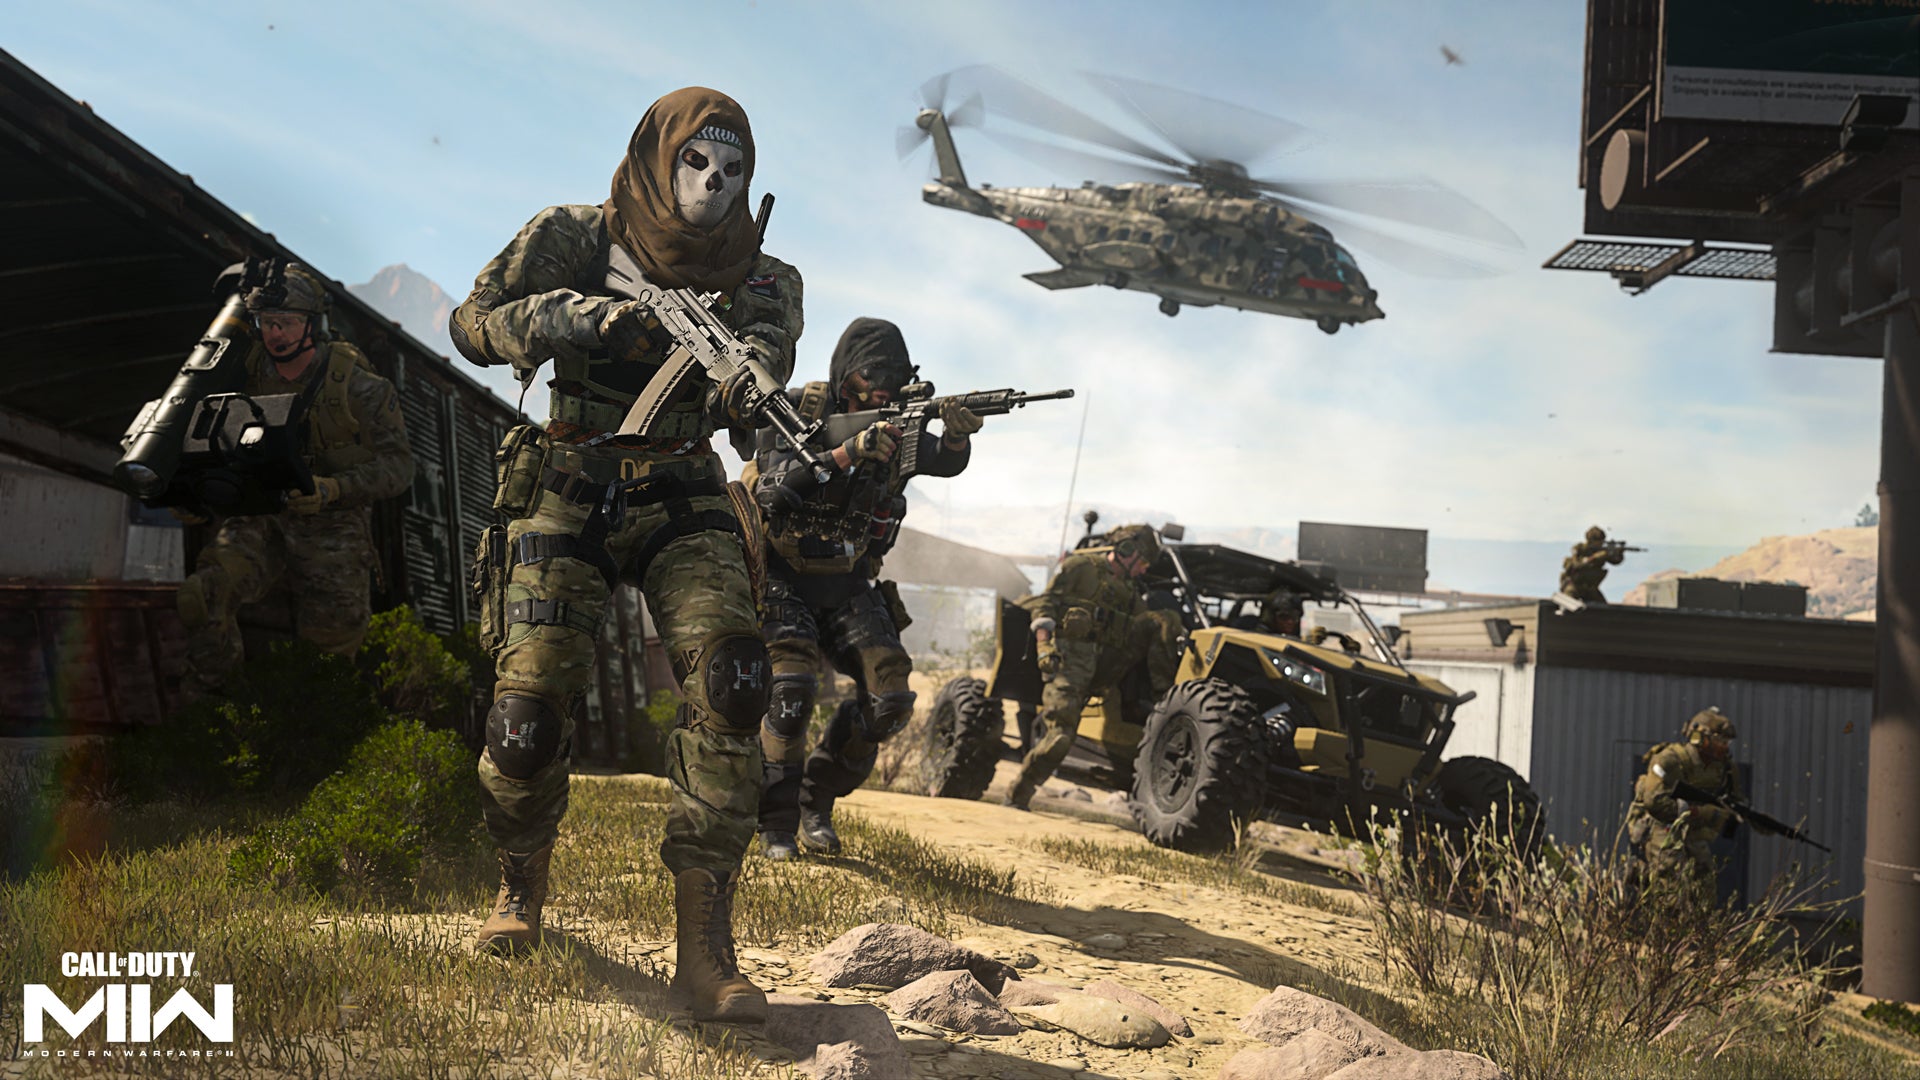 Call of Duty: Modern Warfare 2 multiplayer revealed - here's the details |  VG247